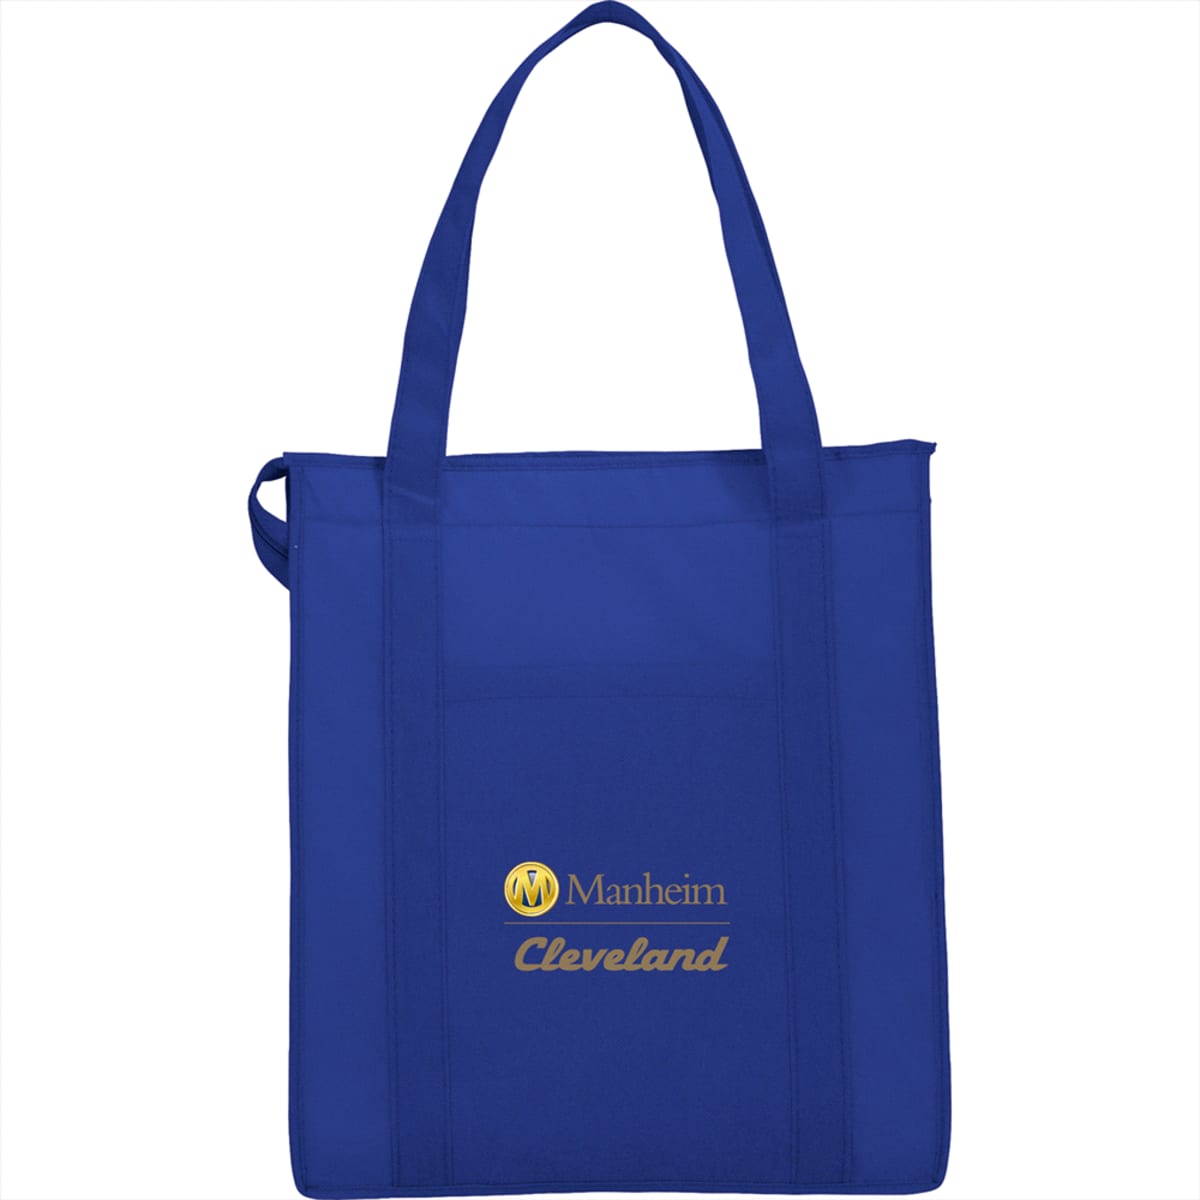 Hercules Insulated Grocery Tote 29L